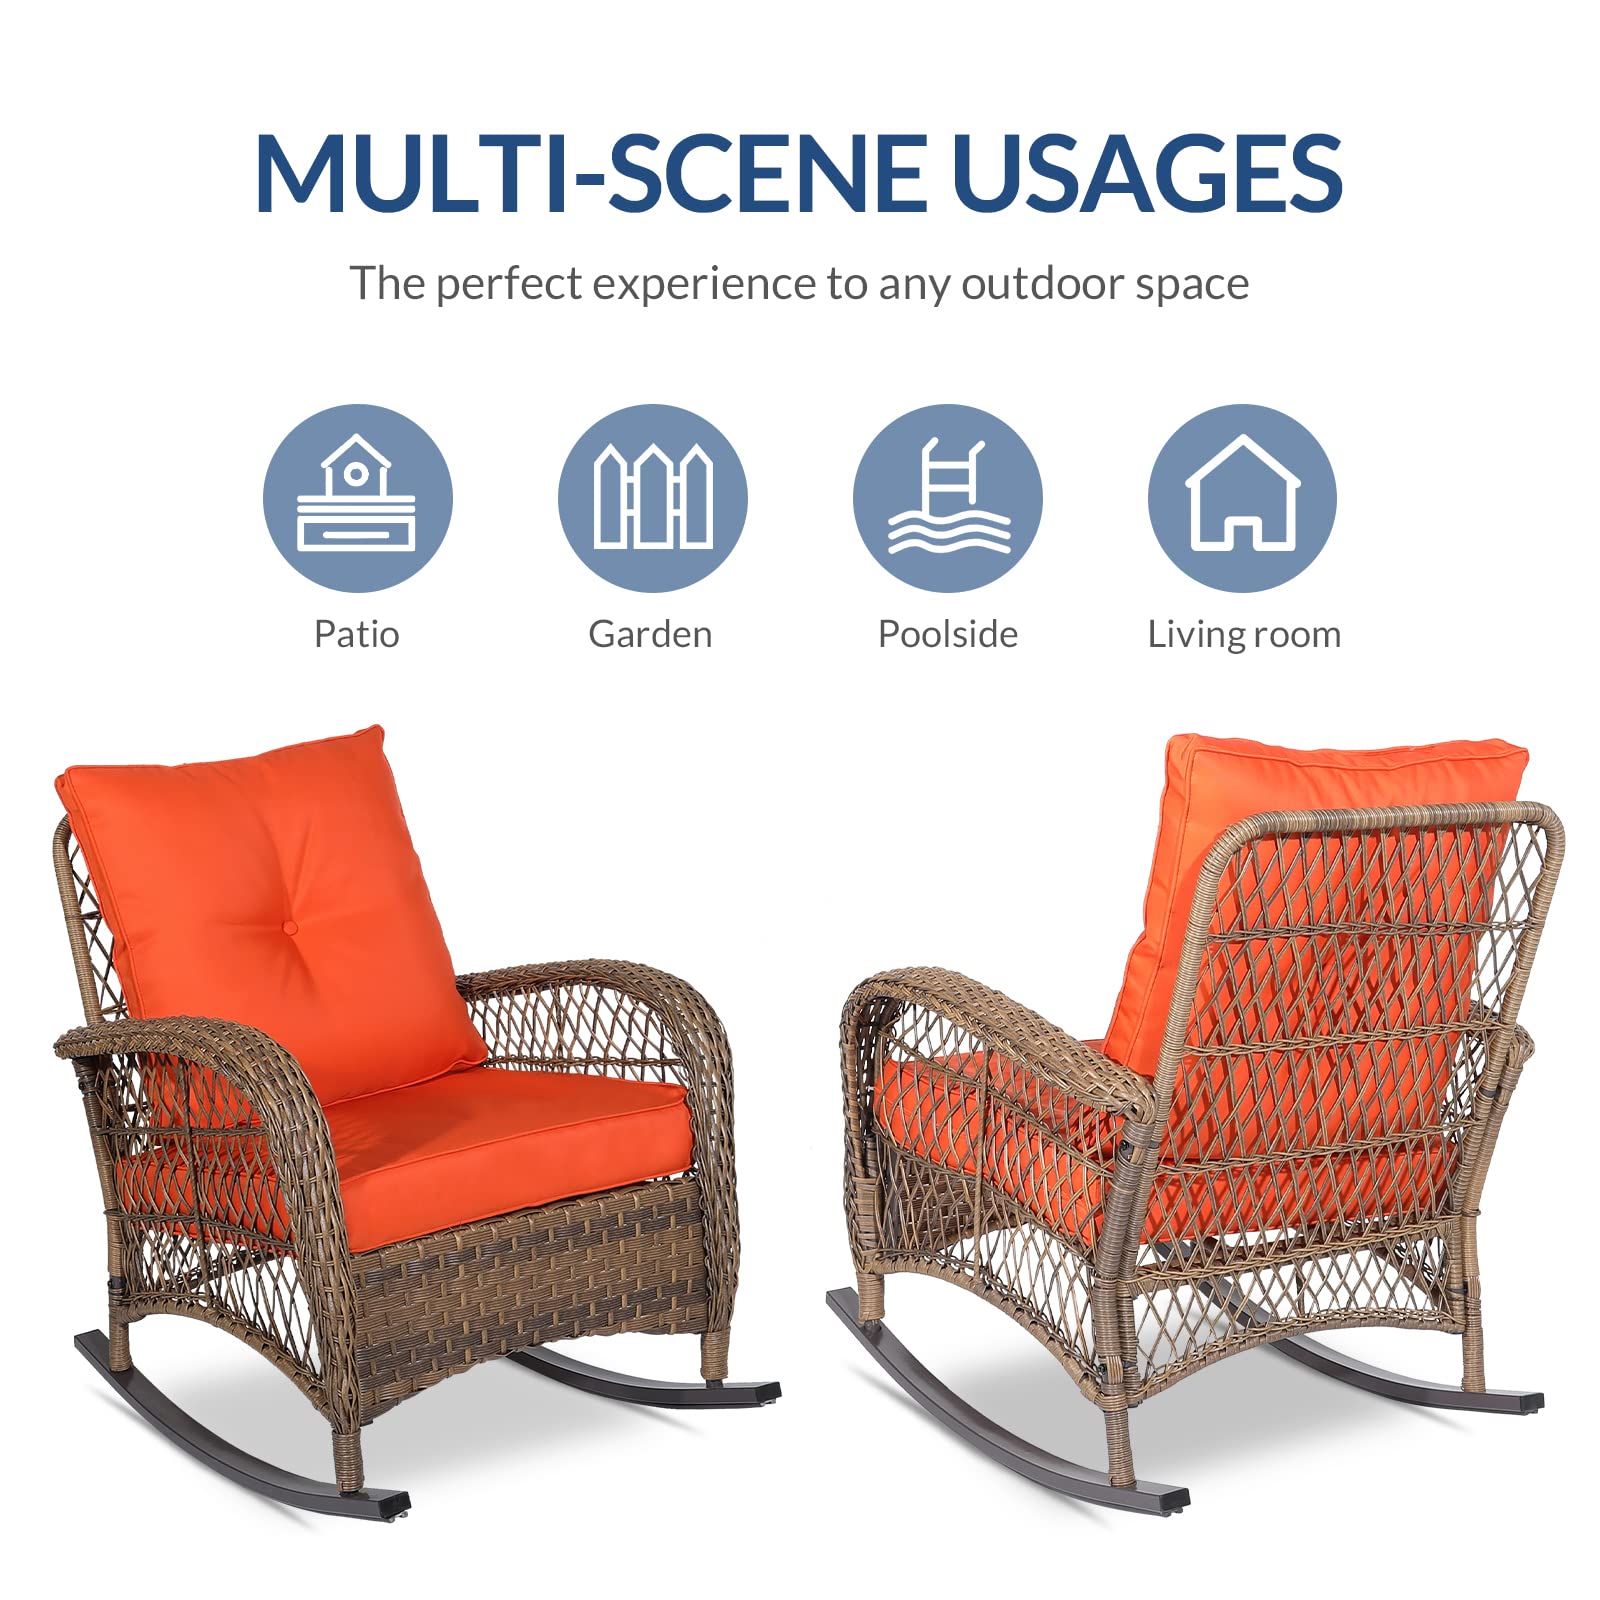 SOCIALCOMFY 3-Piece Outdoor Wicker Rocking Chair Set, Patio Bistro Conversation Sets with Cushions and Glass-Top Coffee Table, Rattan Furniture Sets for Porch & Backyard, Orange - image 3 of 7